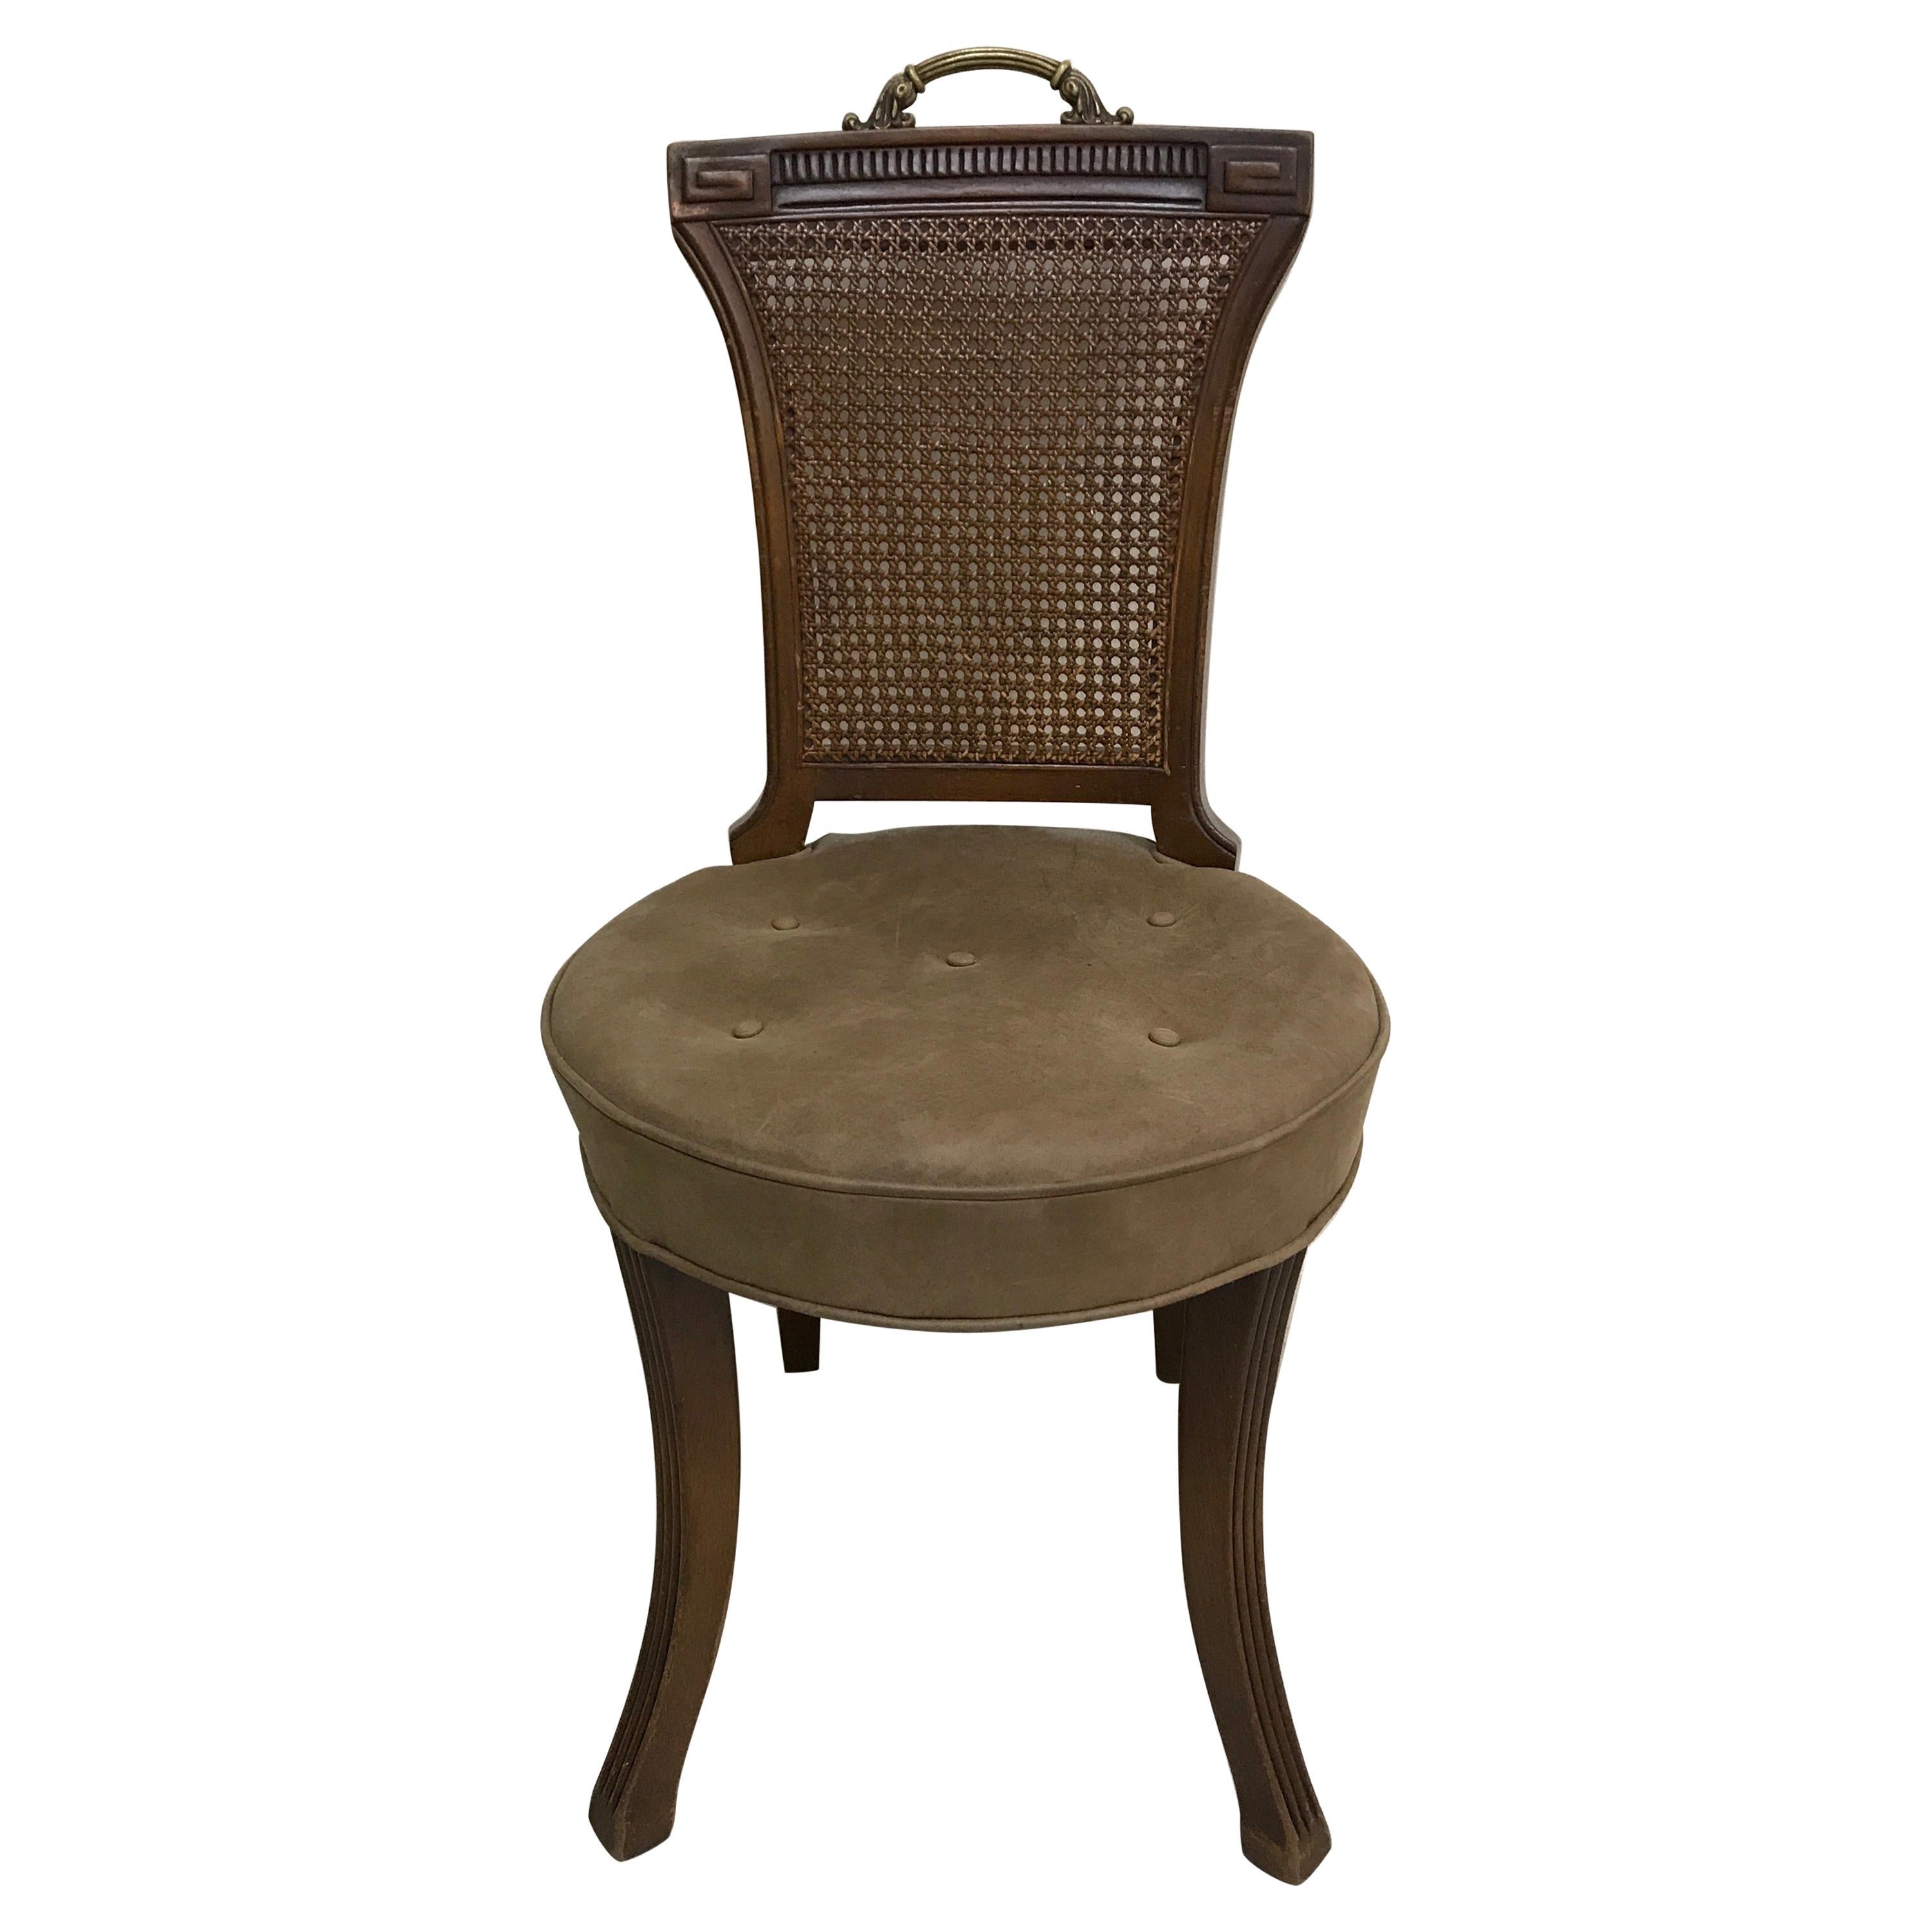 Single Cane Back Desk Chair with Brown Leather Seat